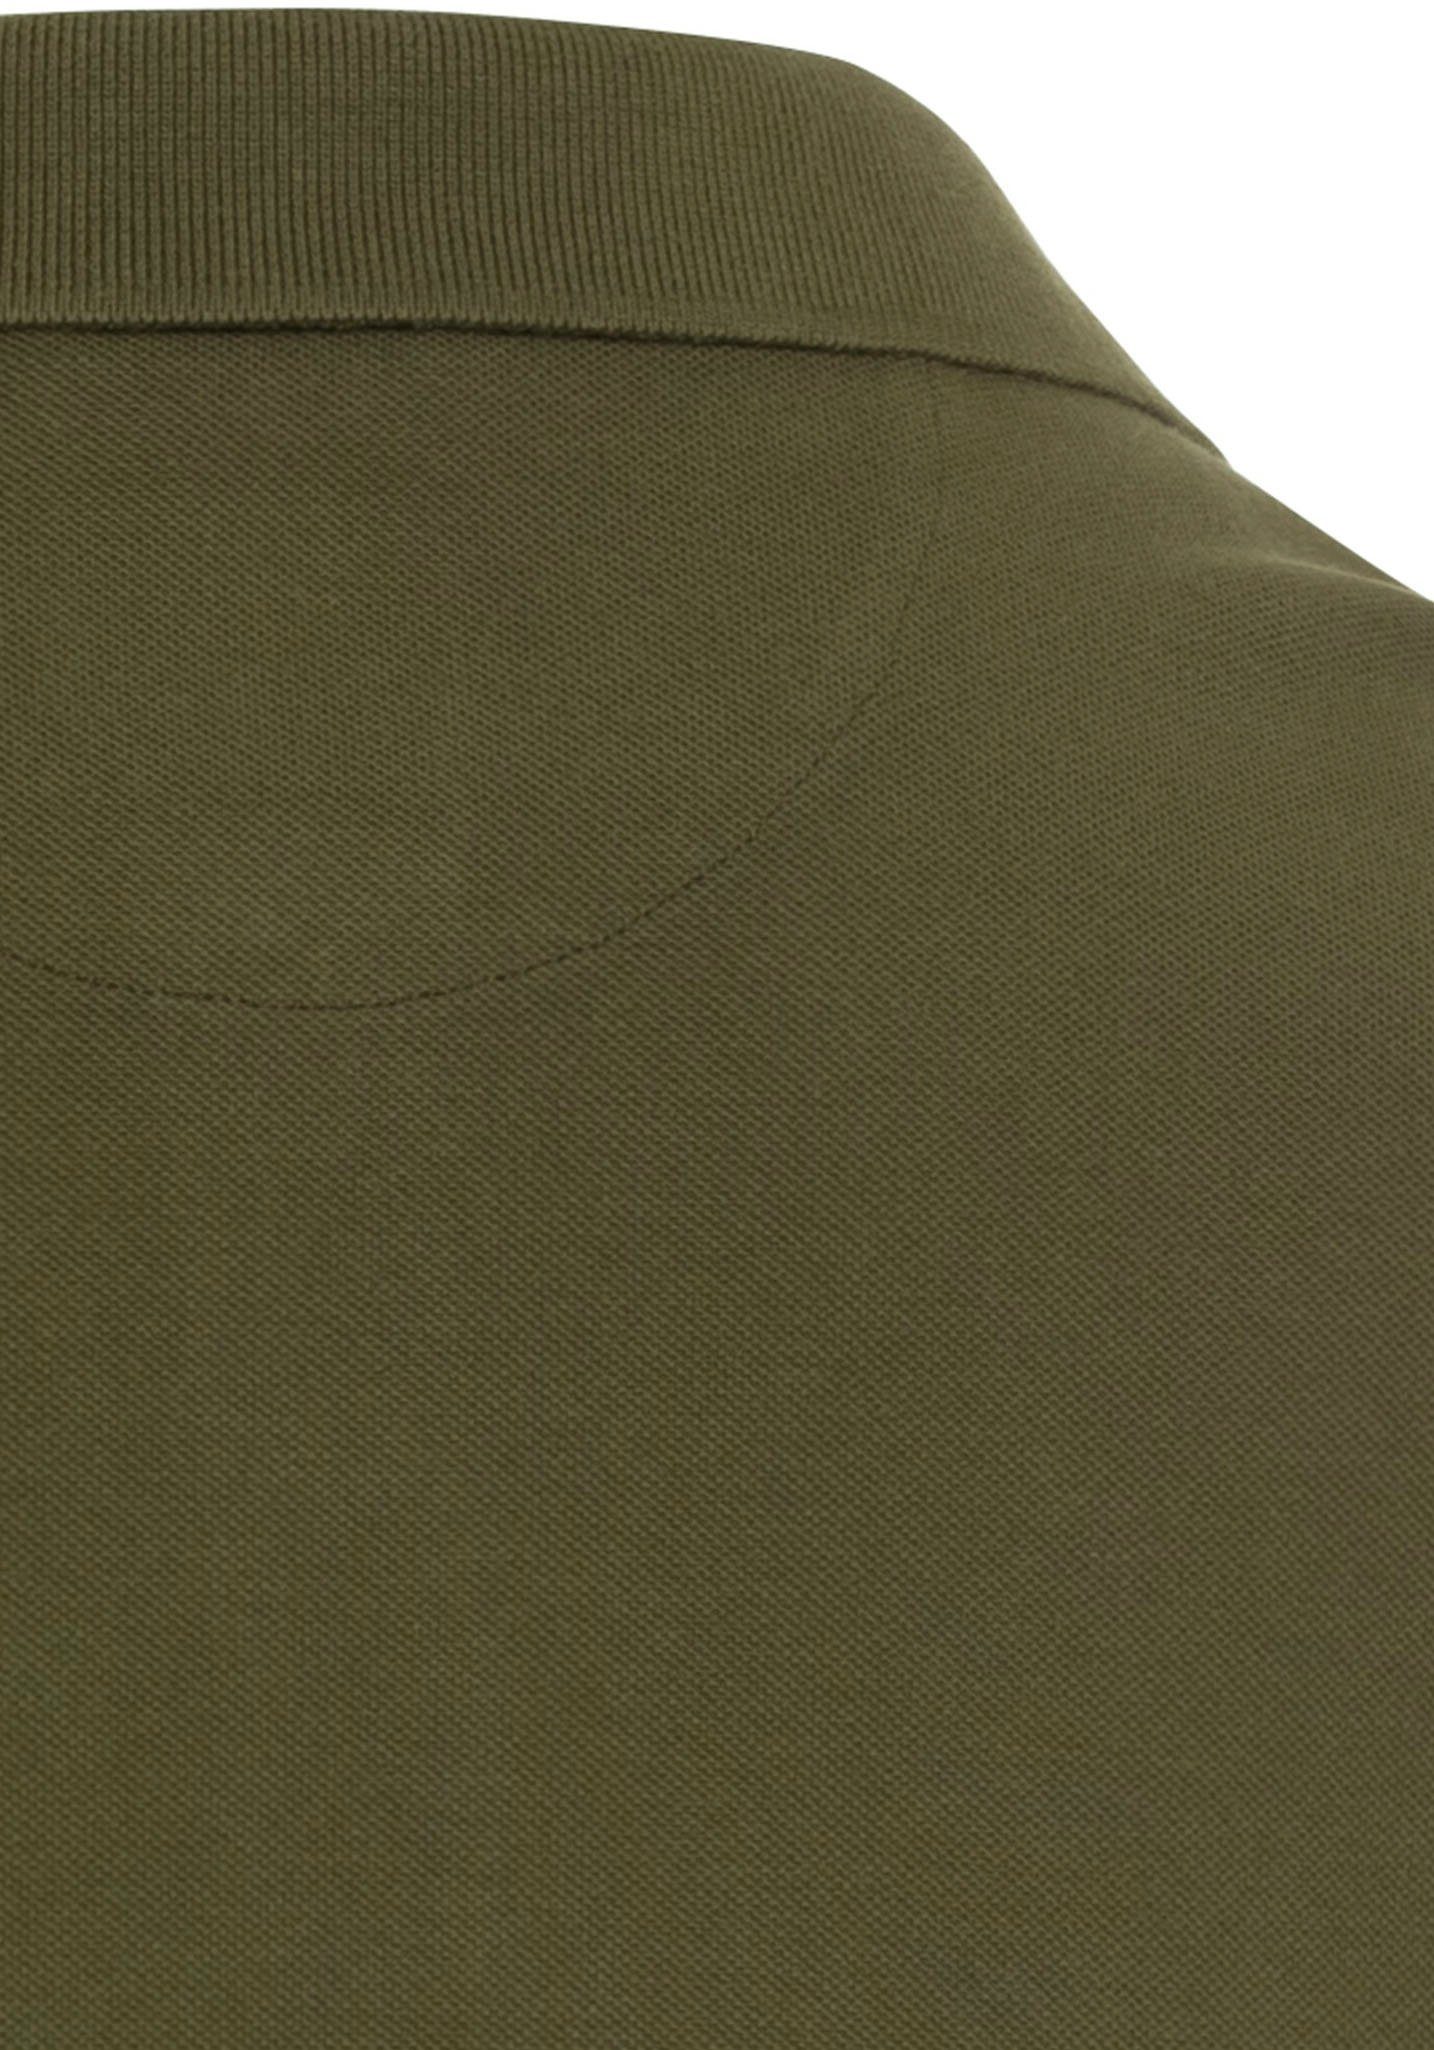 active Poloshirt Olive brown camel